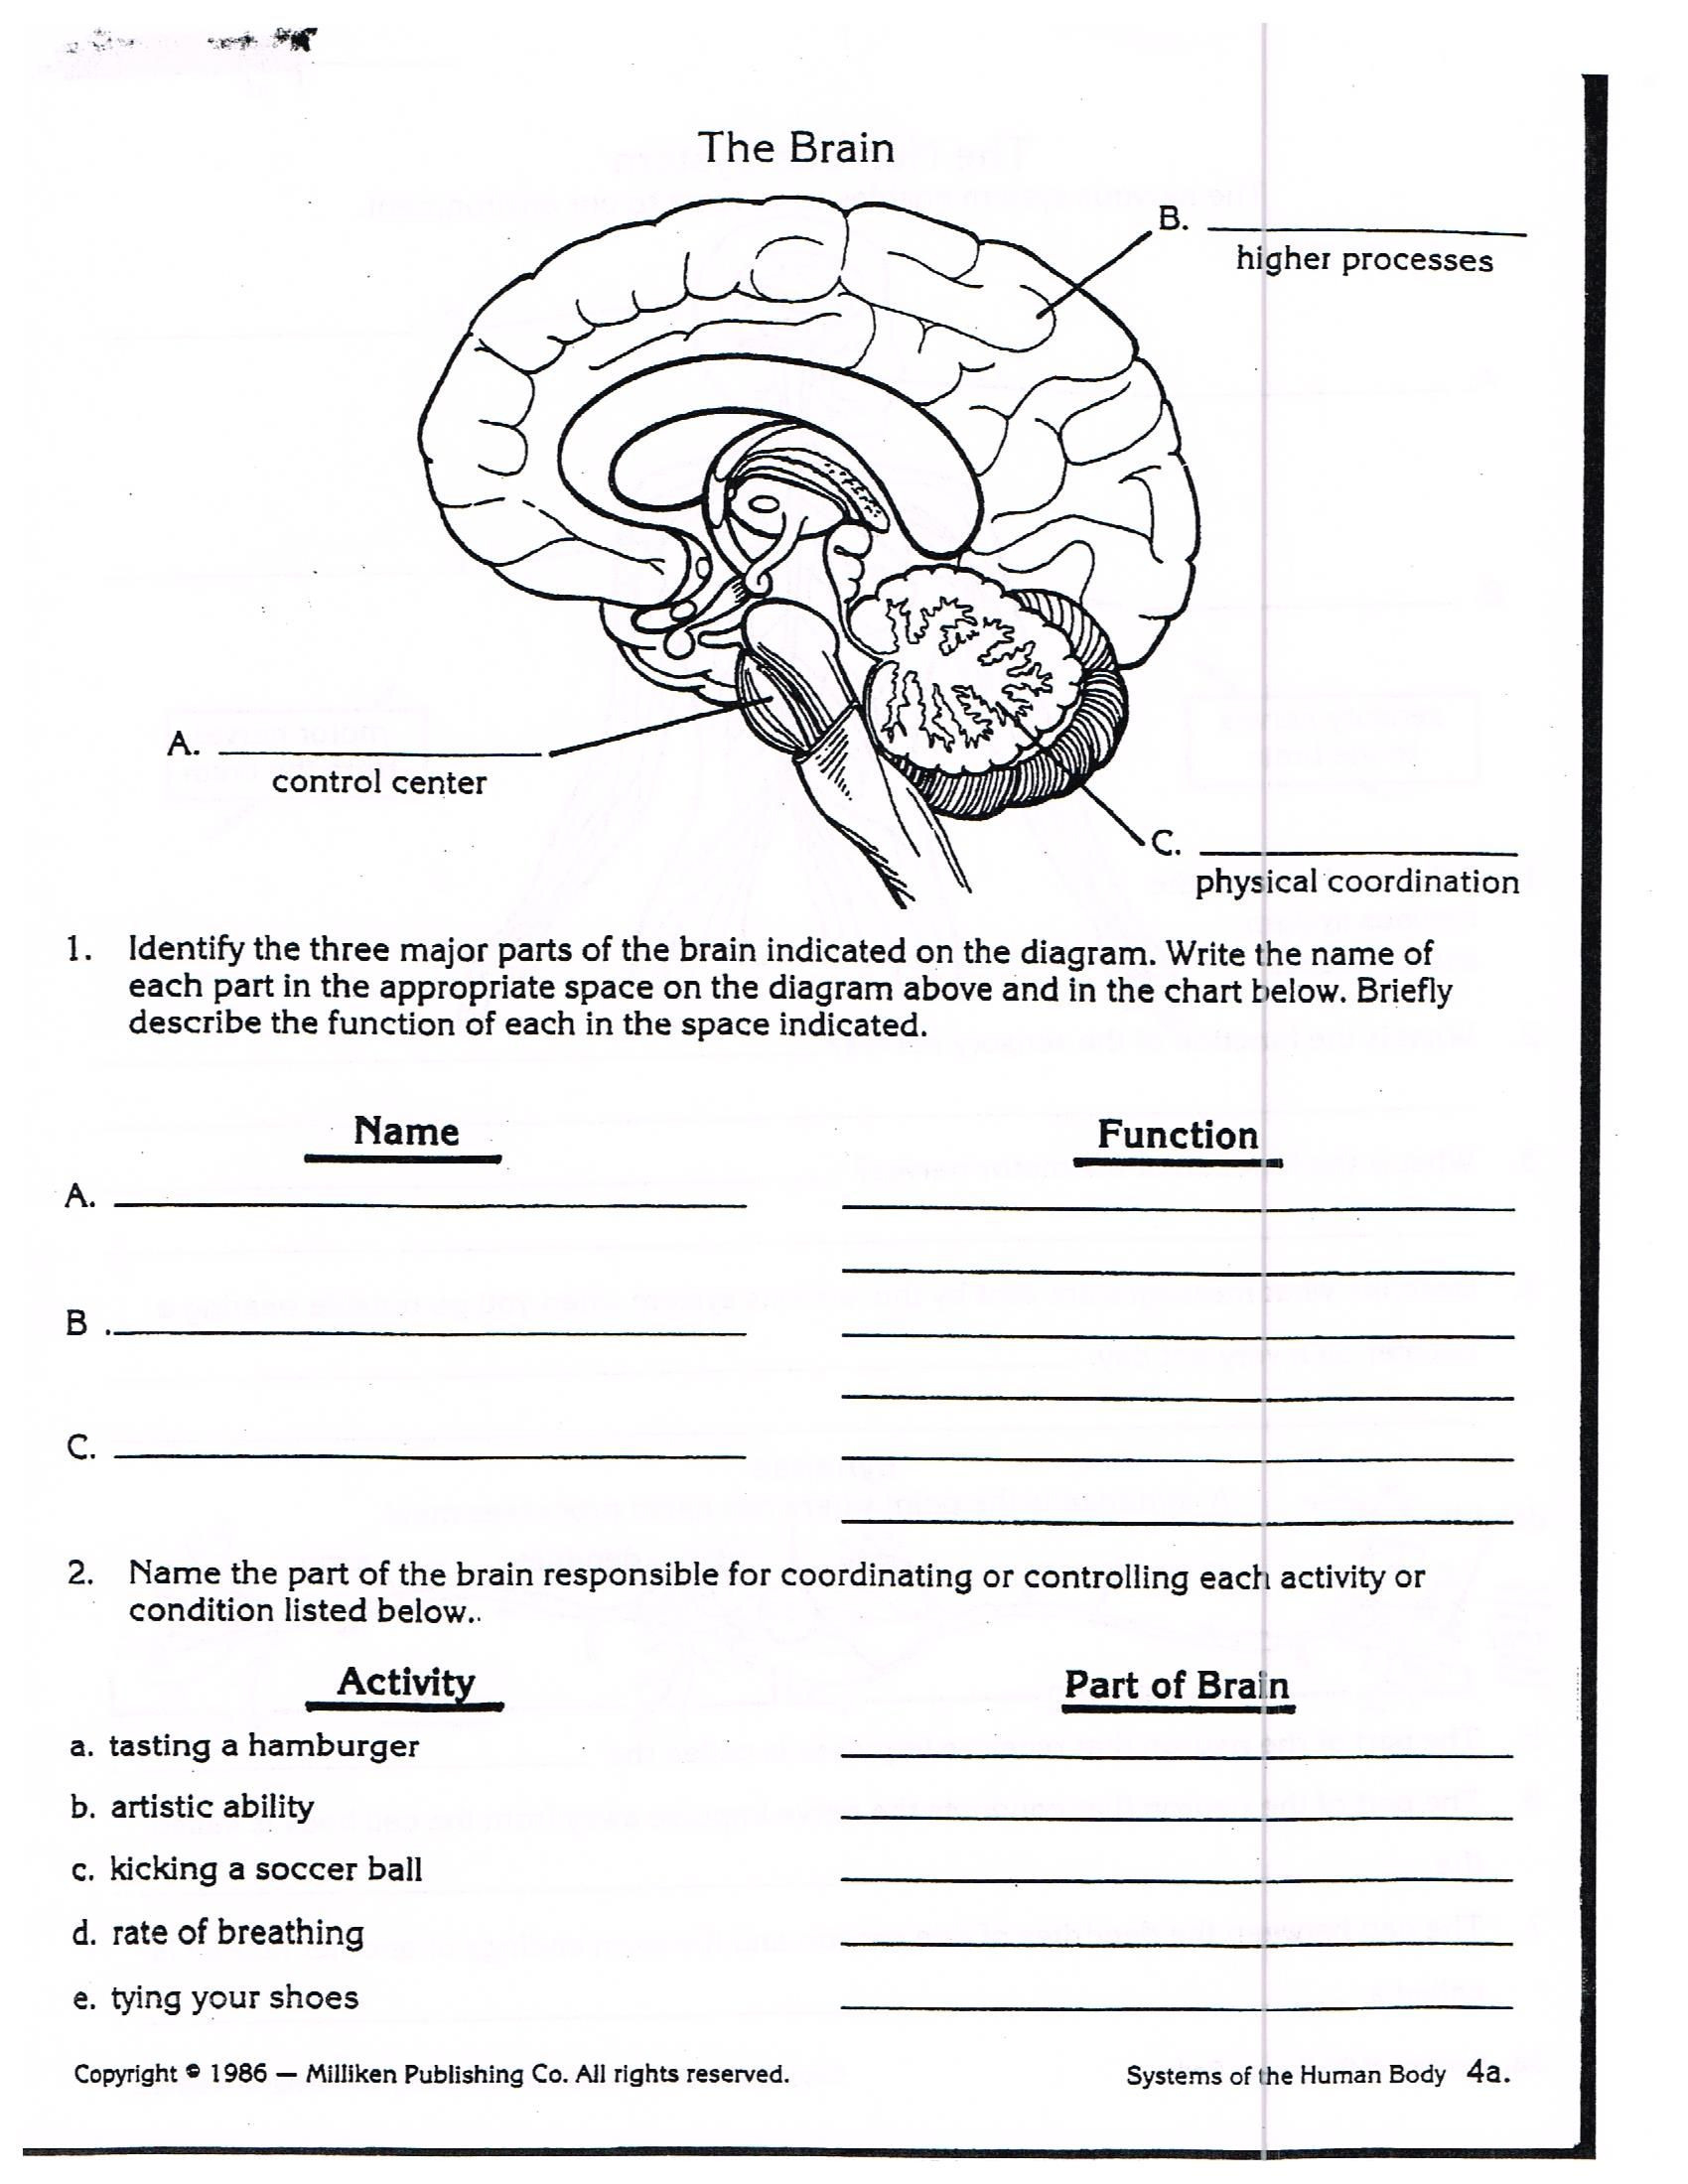 Sheep Brain Dissection Analysis Worksheet Answers — db-excel.com